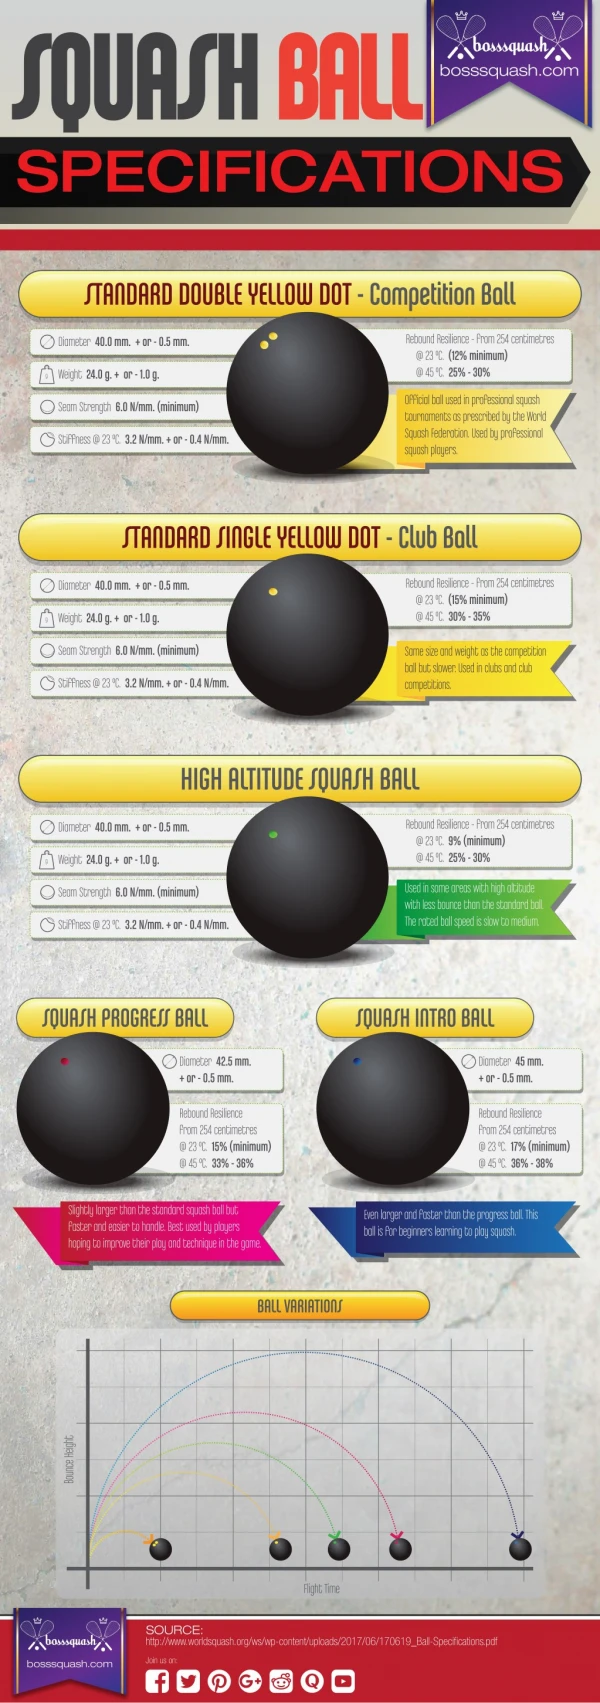 Check Out The Squash Ball Specifications